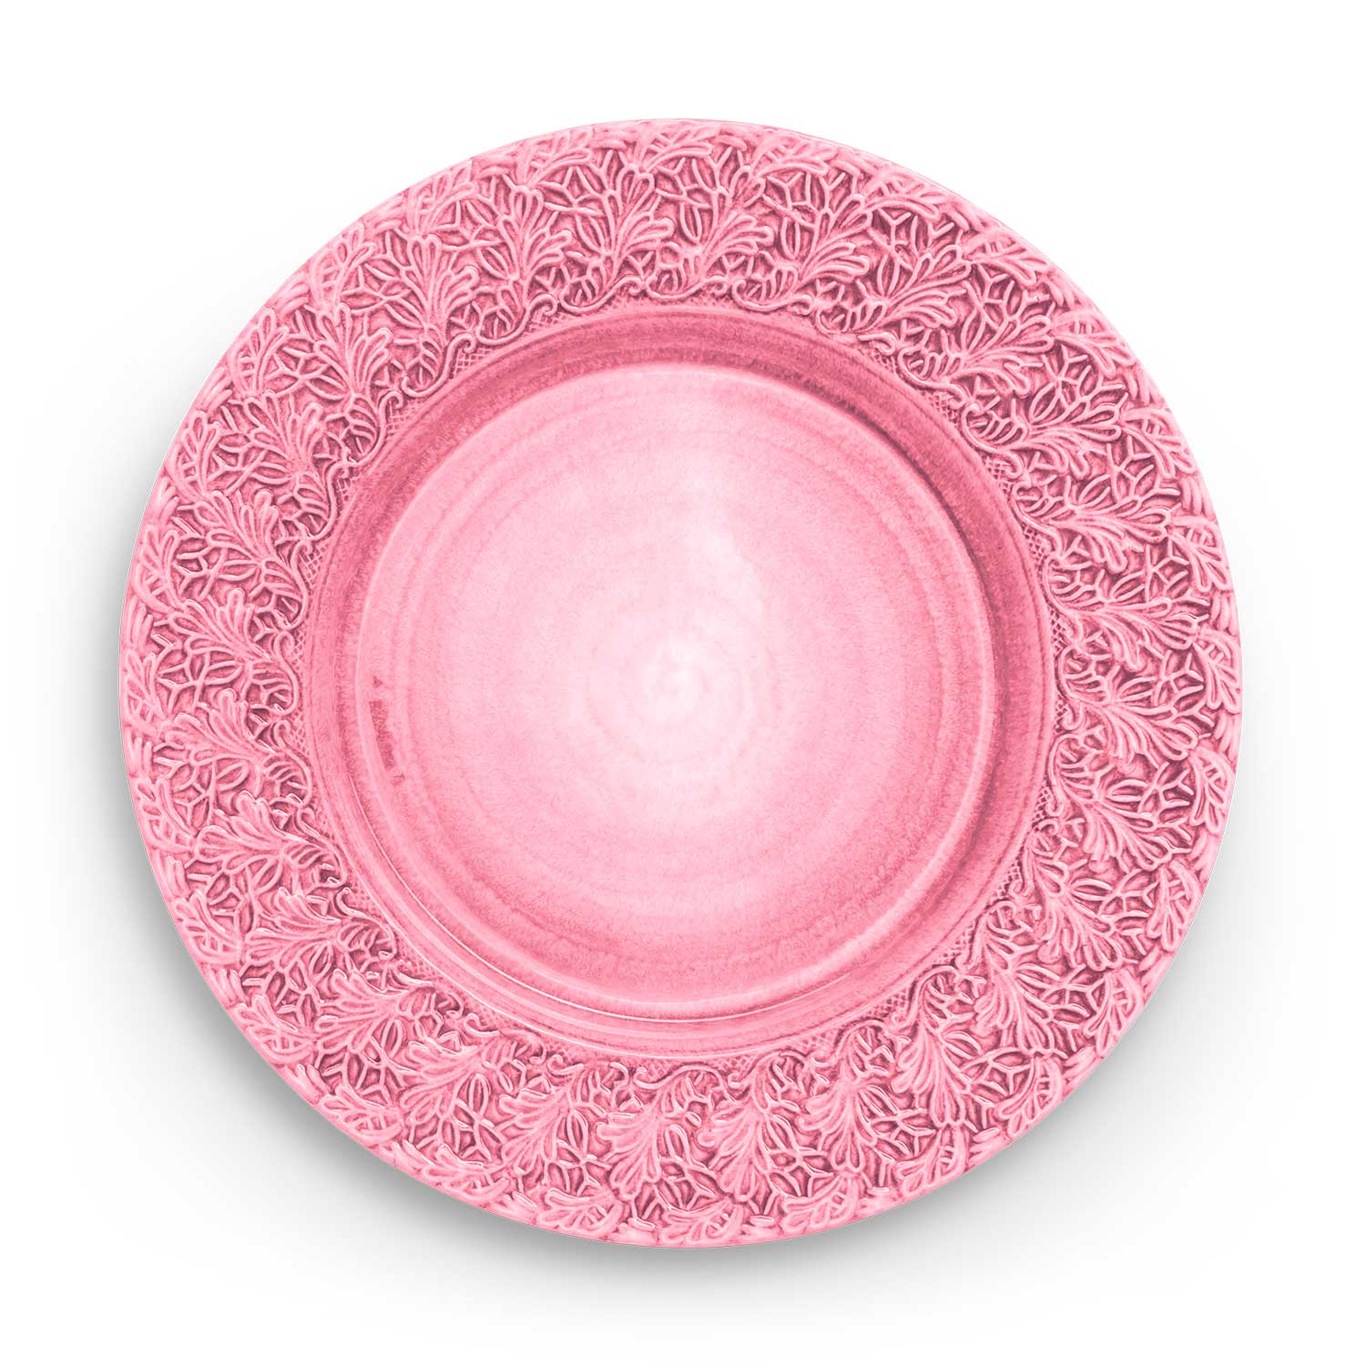 Lace Plate 32 cm, Pink